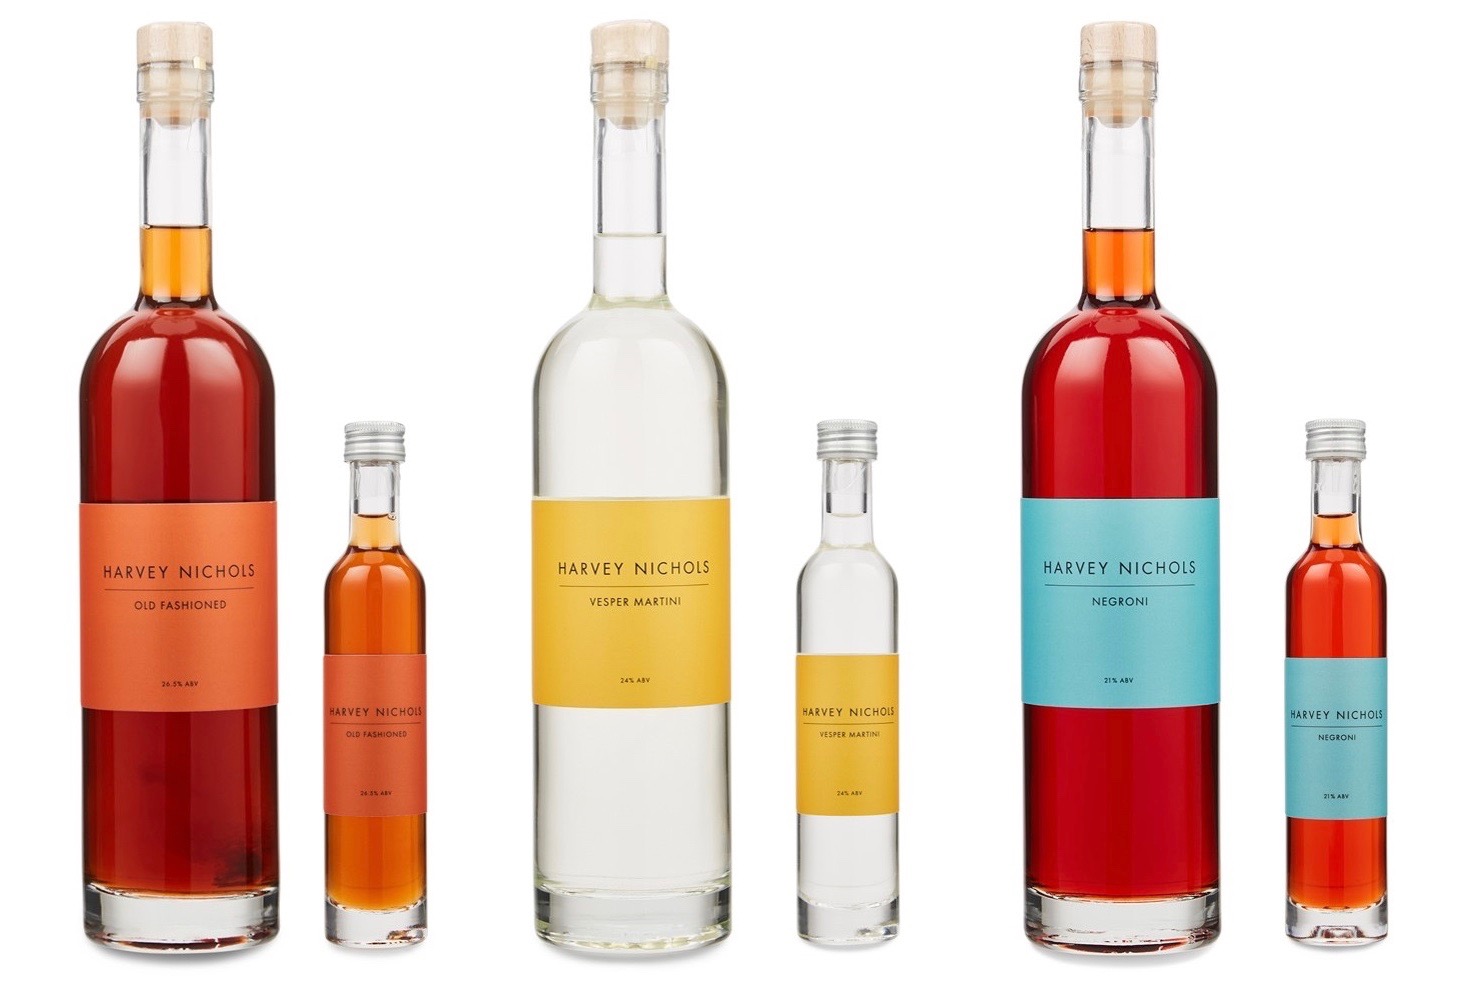 Harvey Nichols is shaking up September with its own mixed cocktail range